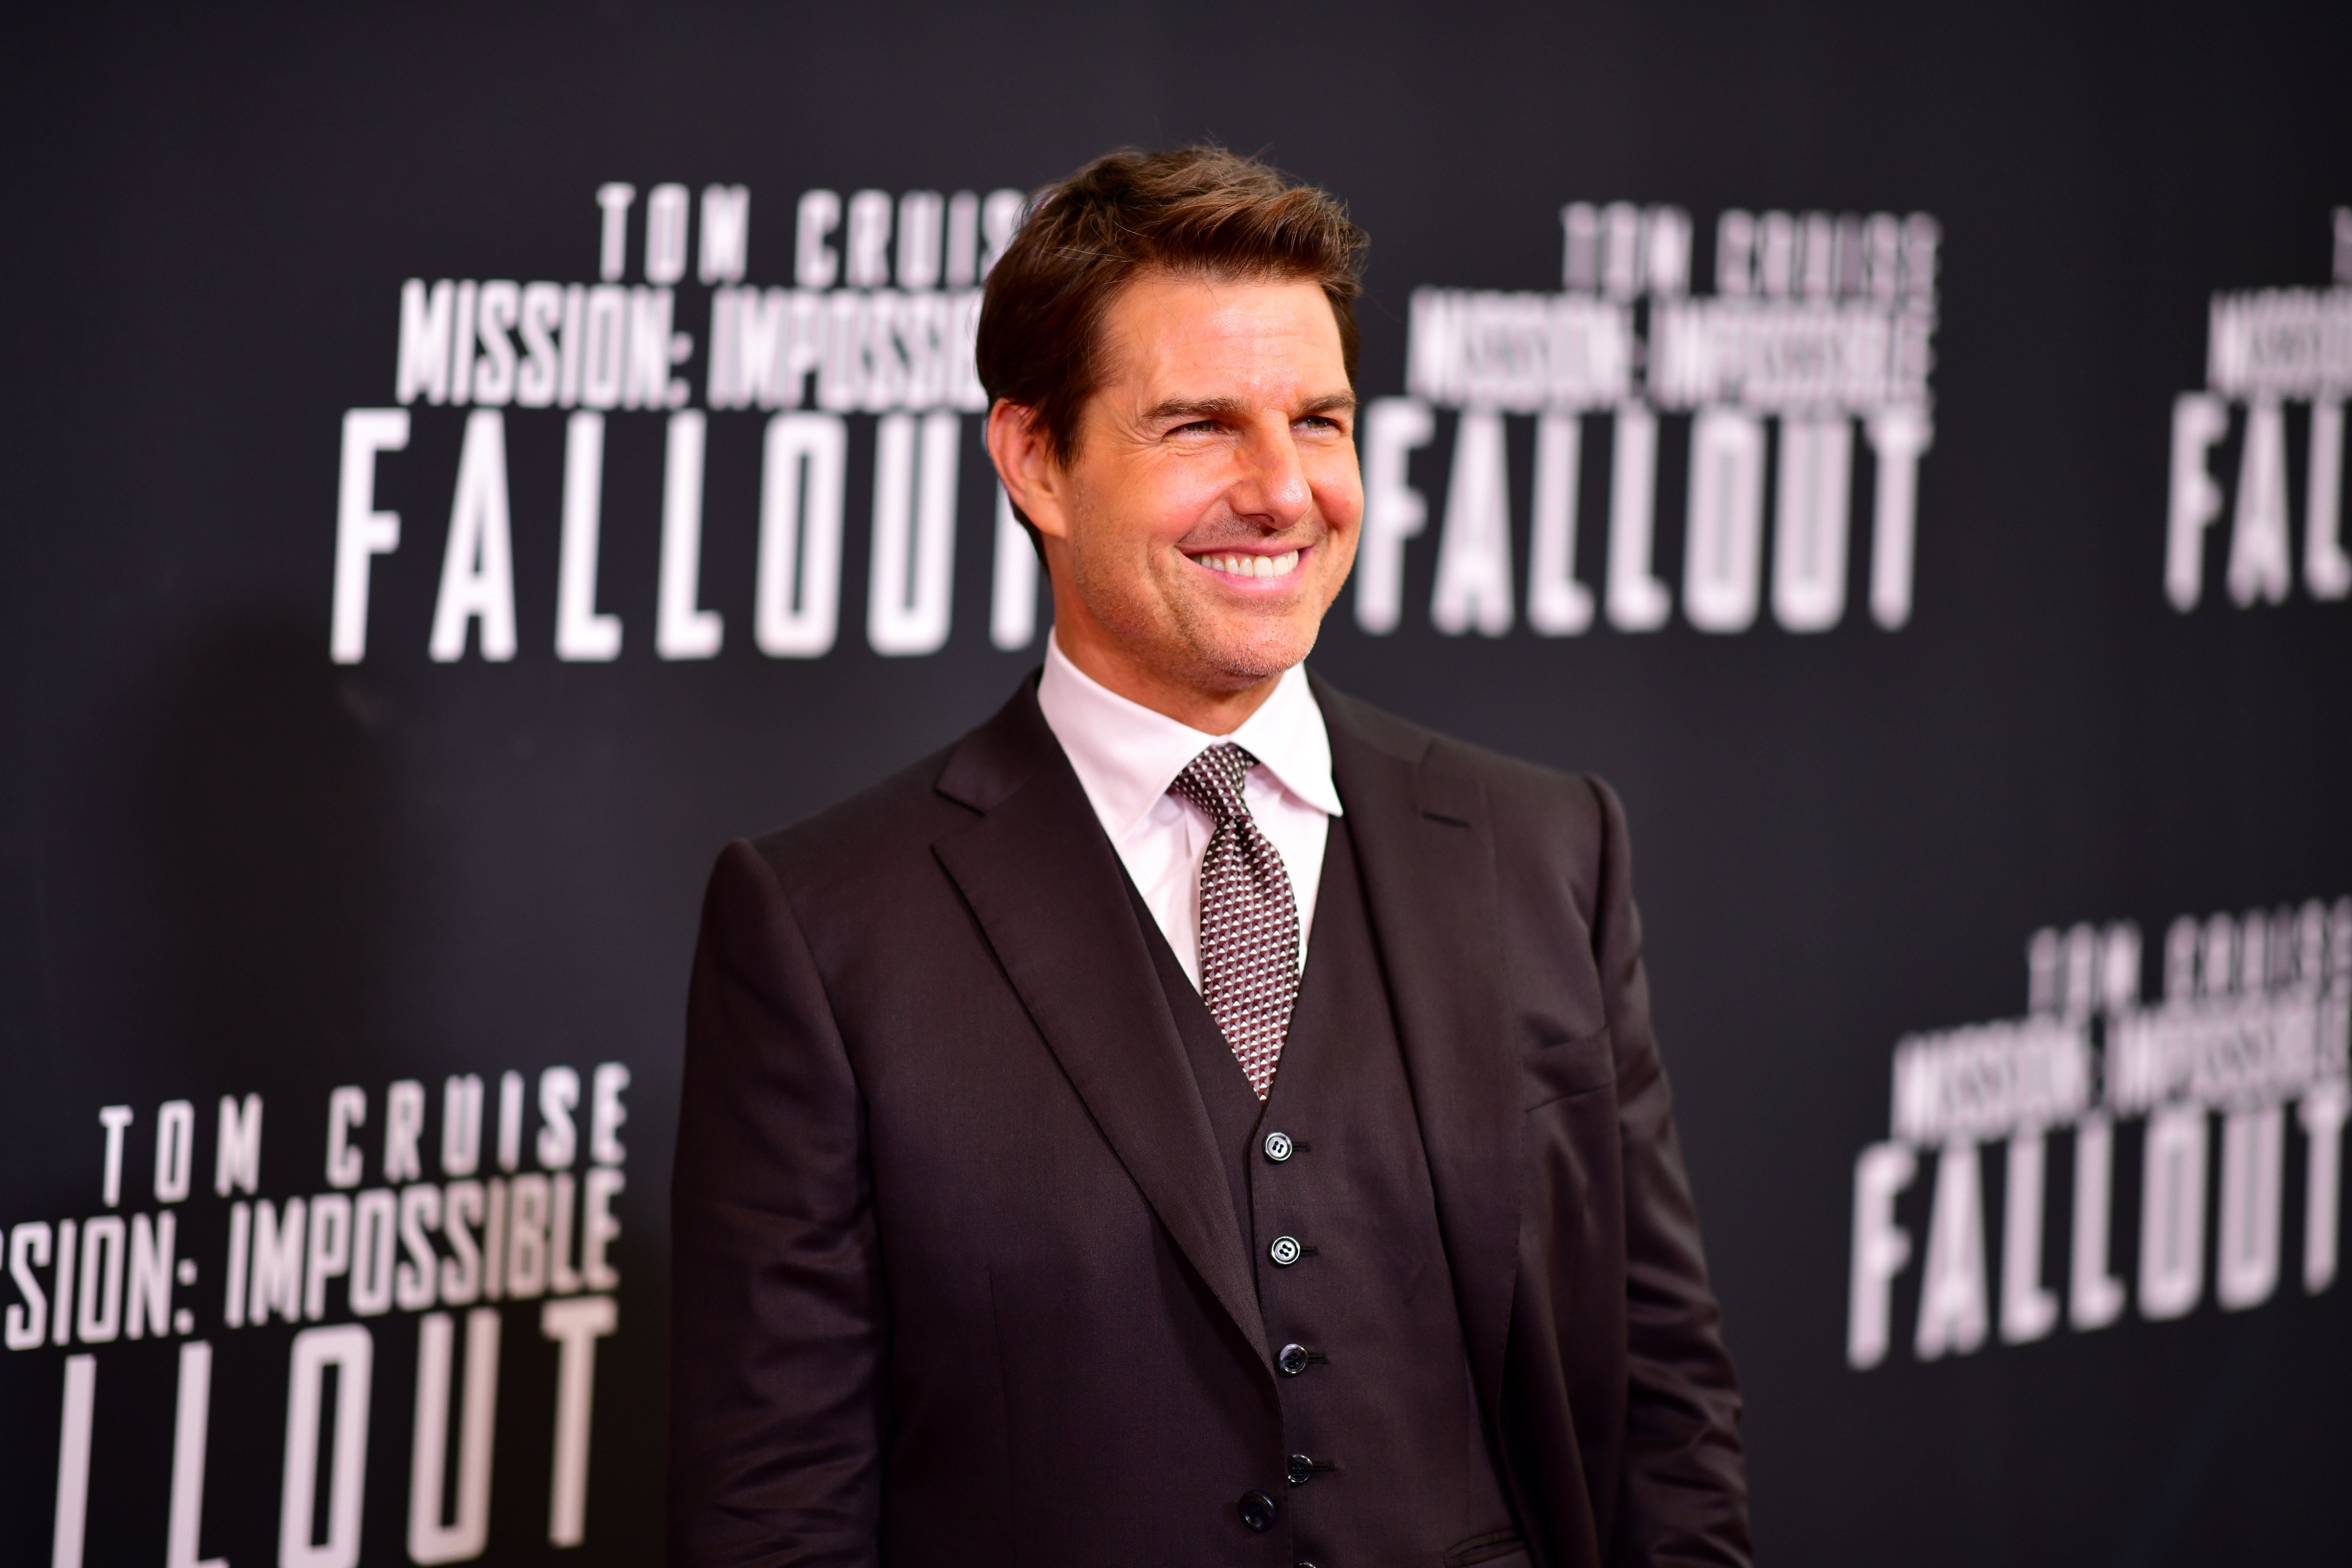 Tom Cruise at the "Mission: Impossible - Fallout" U.S. Premiere at Lockheed Martin IMAX Theater at the Smithsonian National Air & Space Museum on July 22, 2018 | Photo: Getty Images